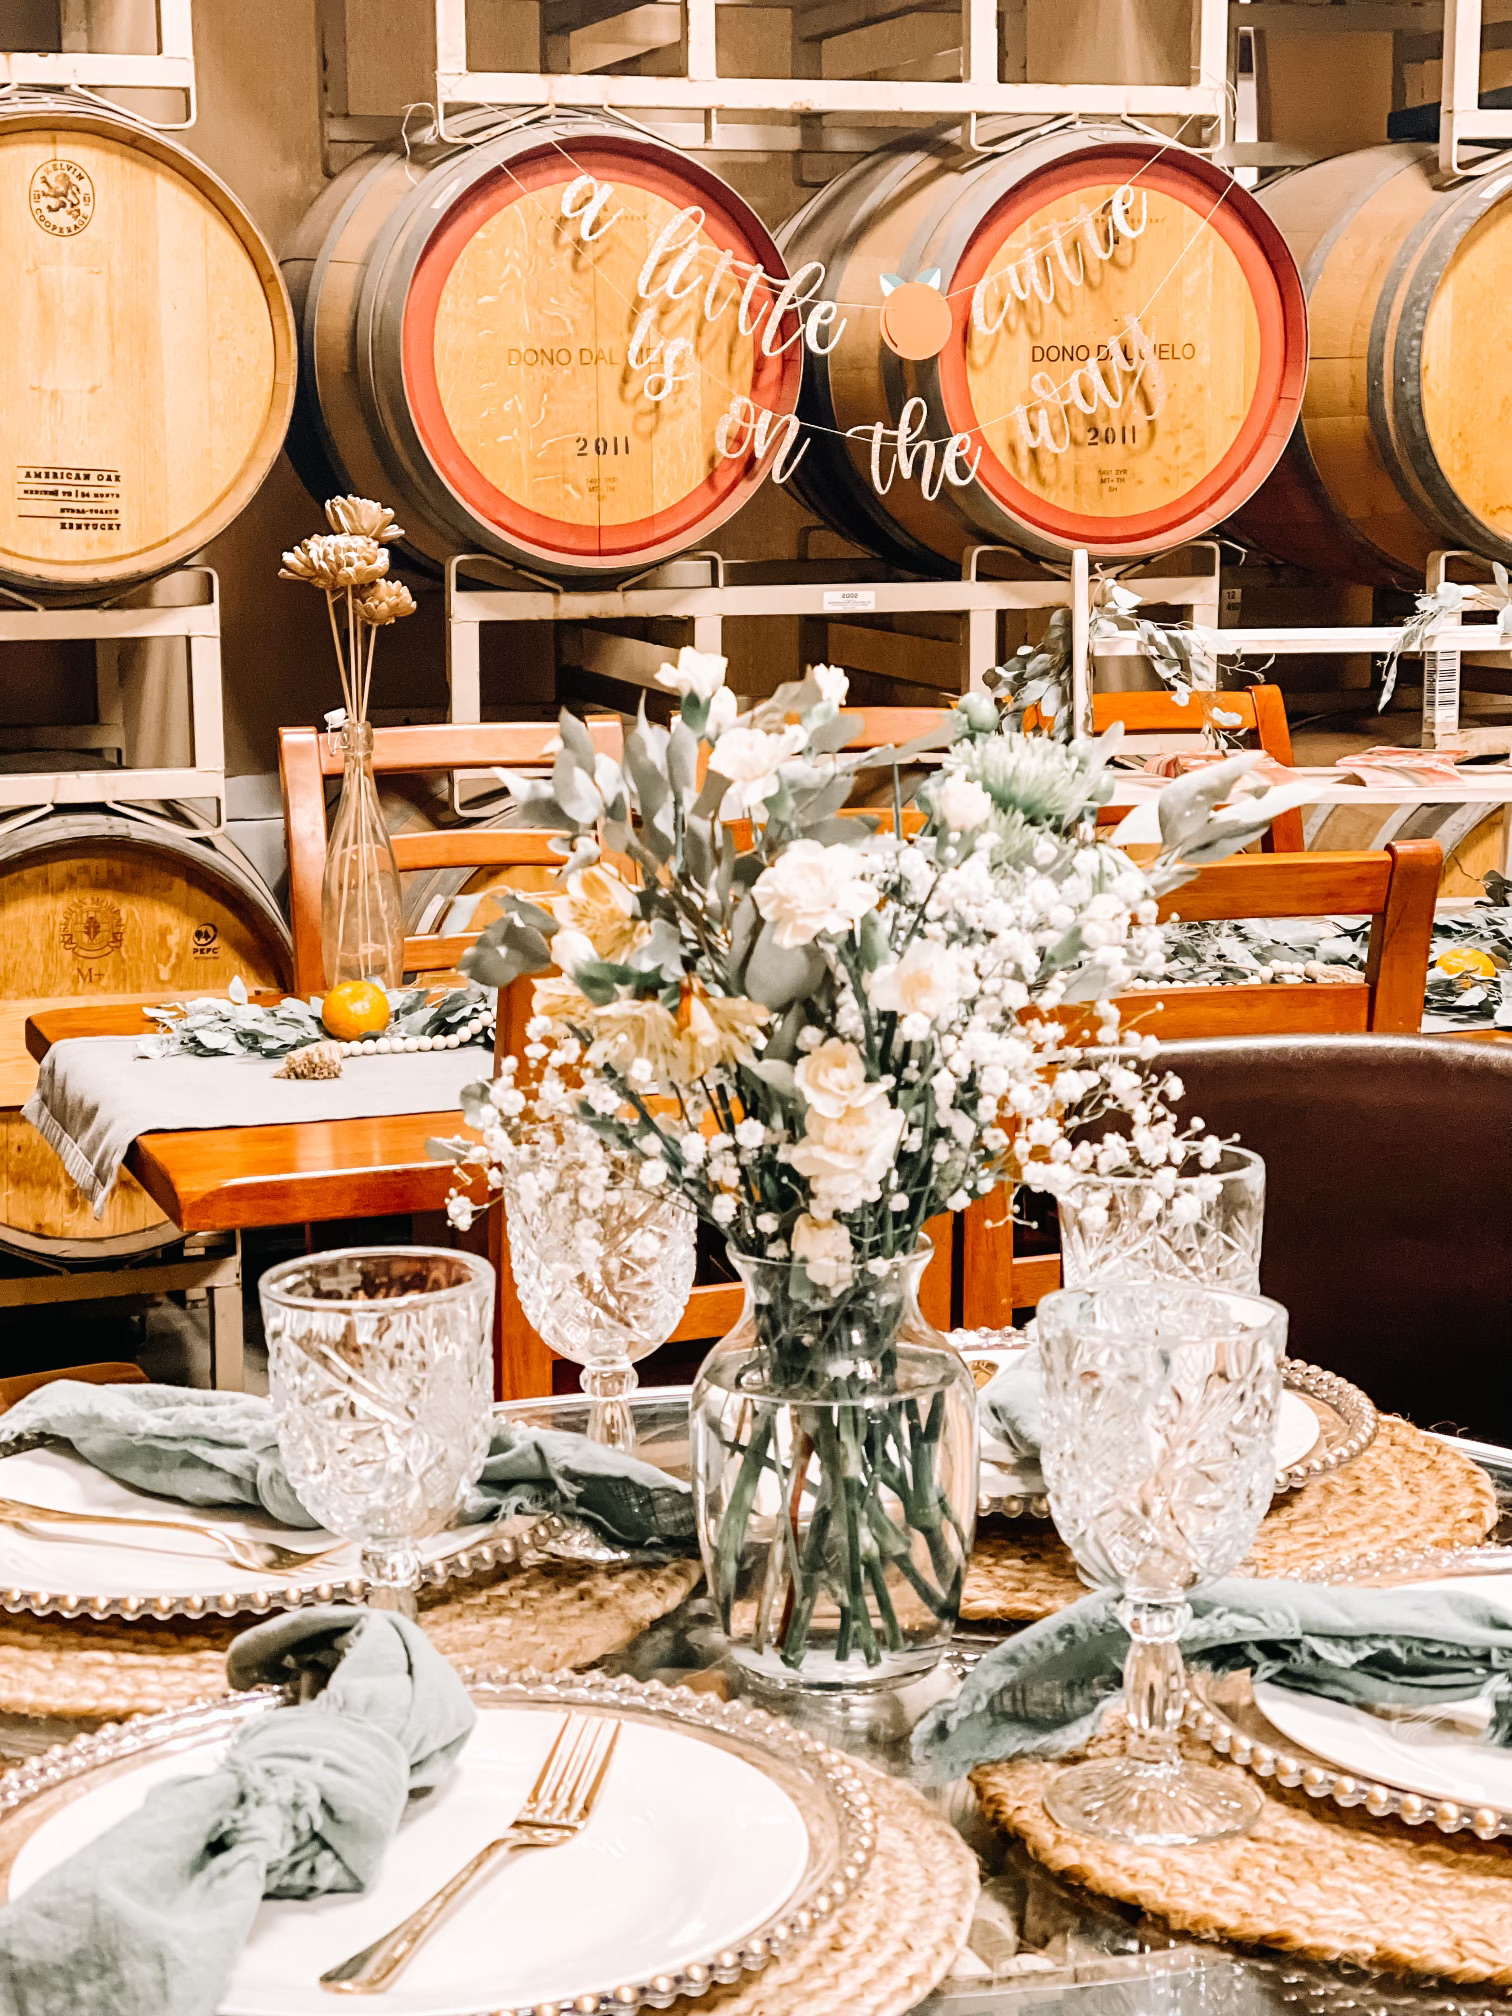 Table setting in winery barrel room